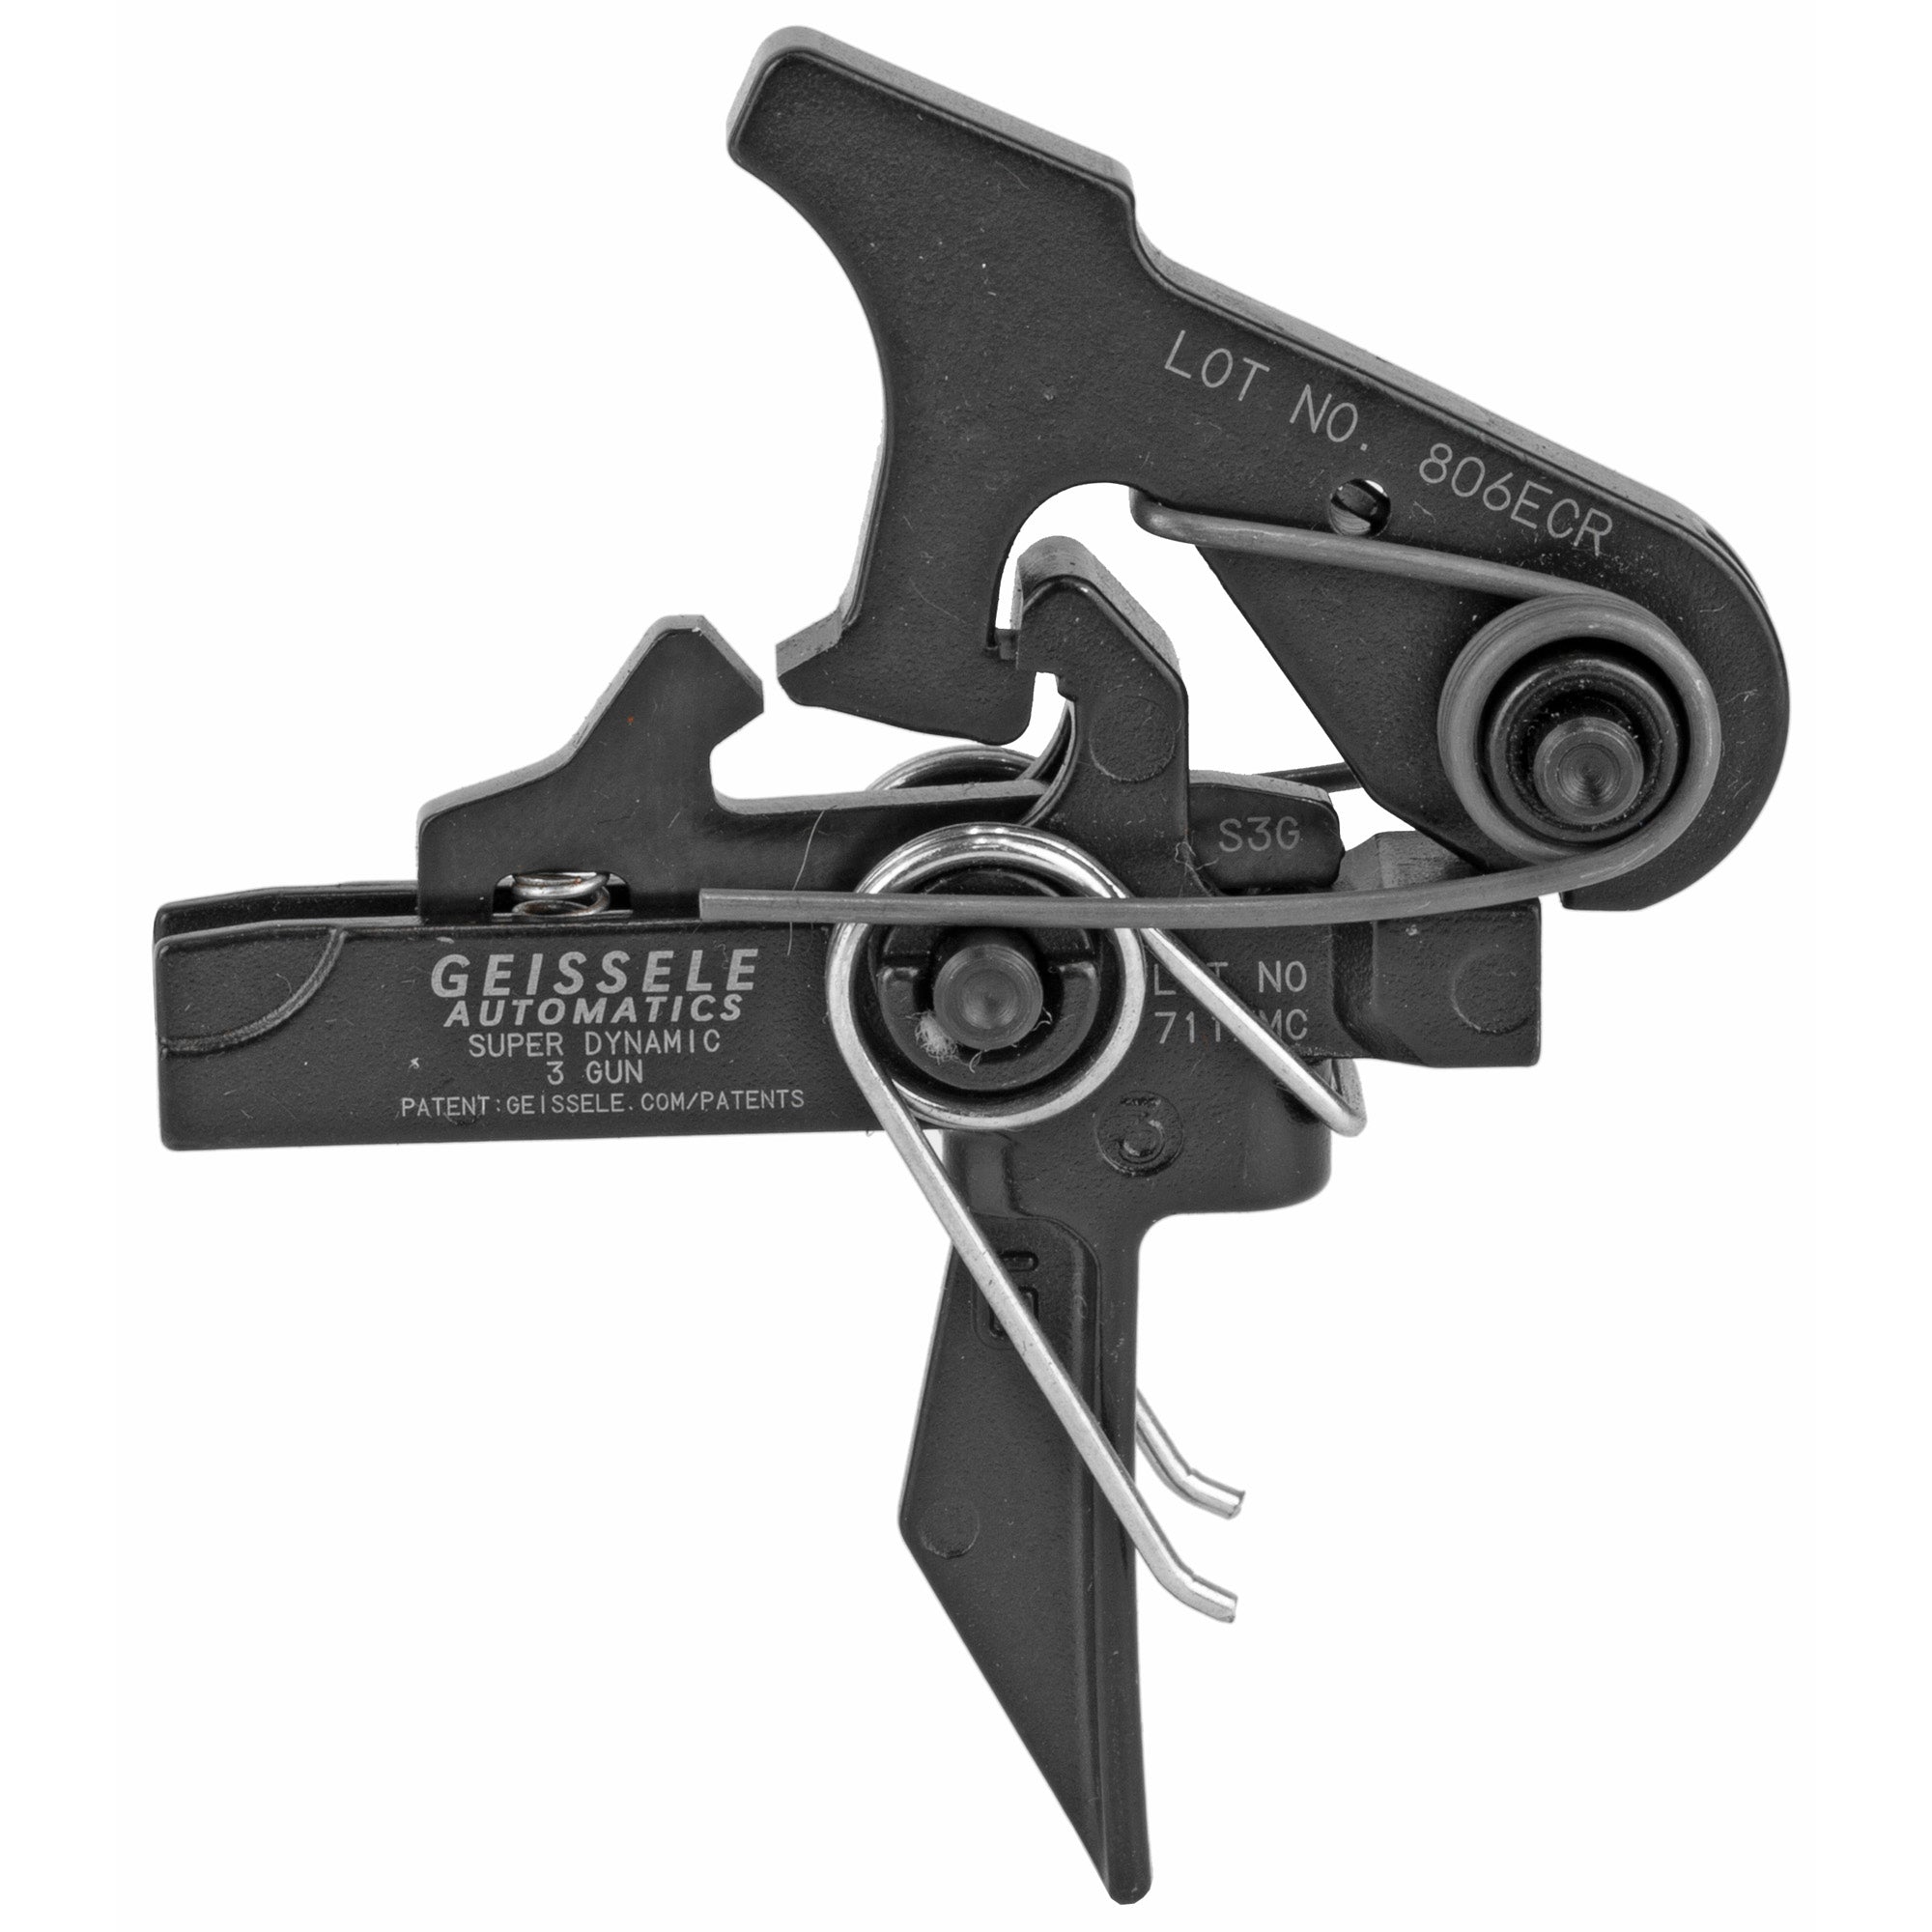 Geissele SD-3G Super Dynamic 3-Gun Trigger, highlighting its sleek design and optimized mechanism for competitive shooting speed and accuracy.